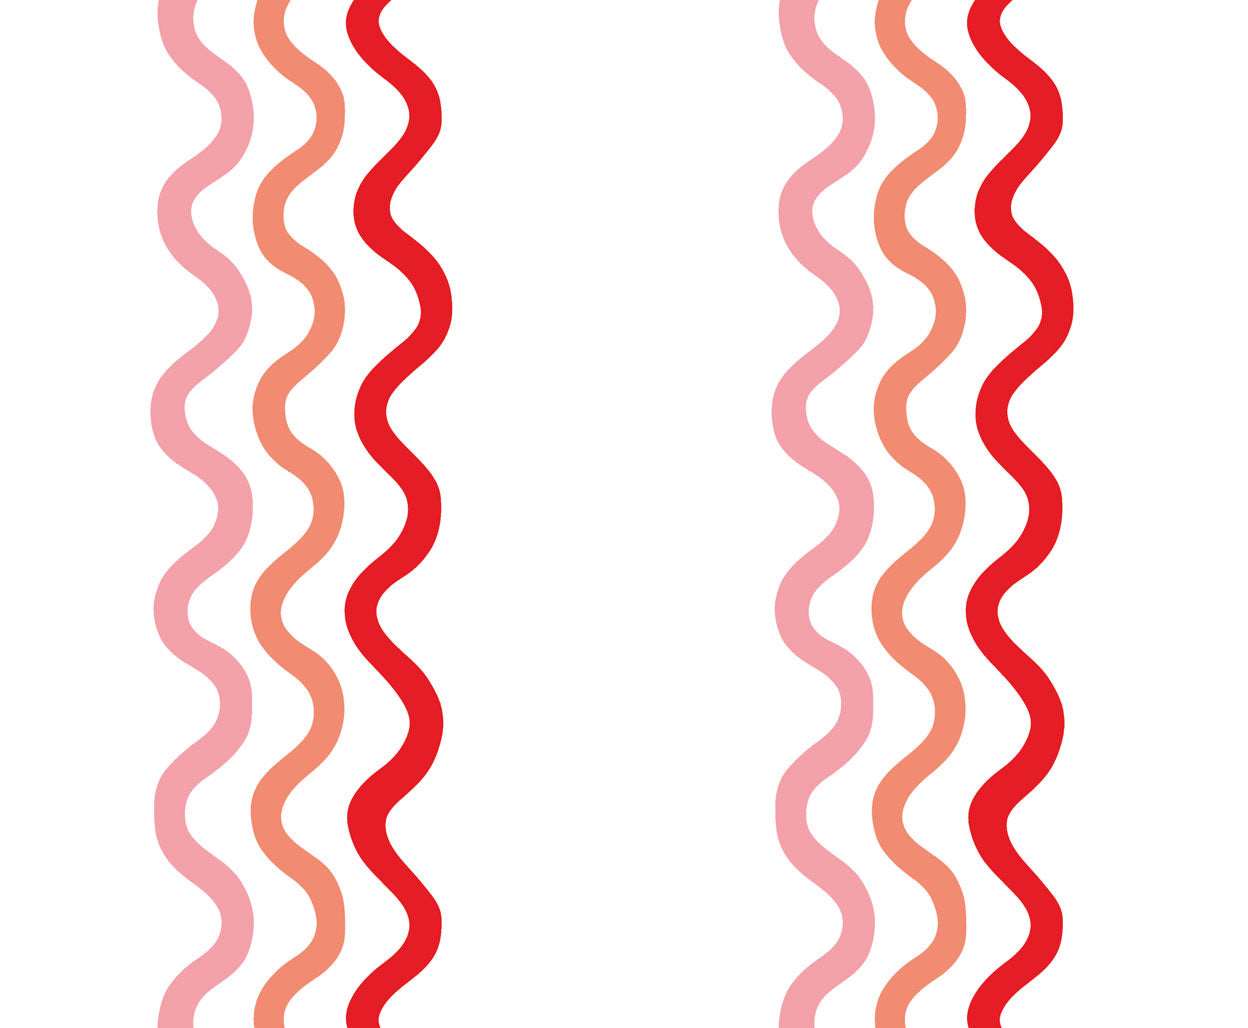 Detail of fabric in a wavy stripe print in pink, red and orange on a white field.